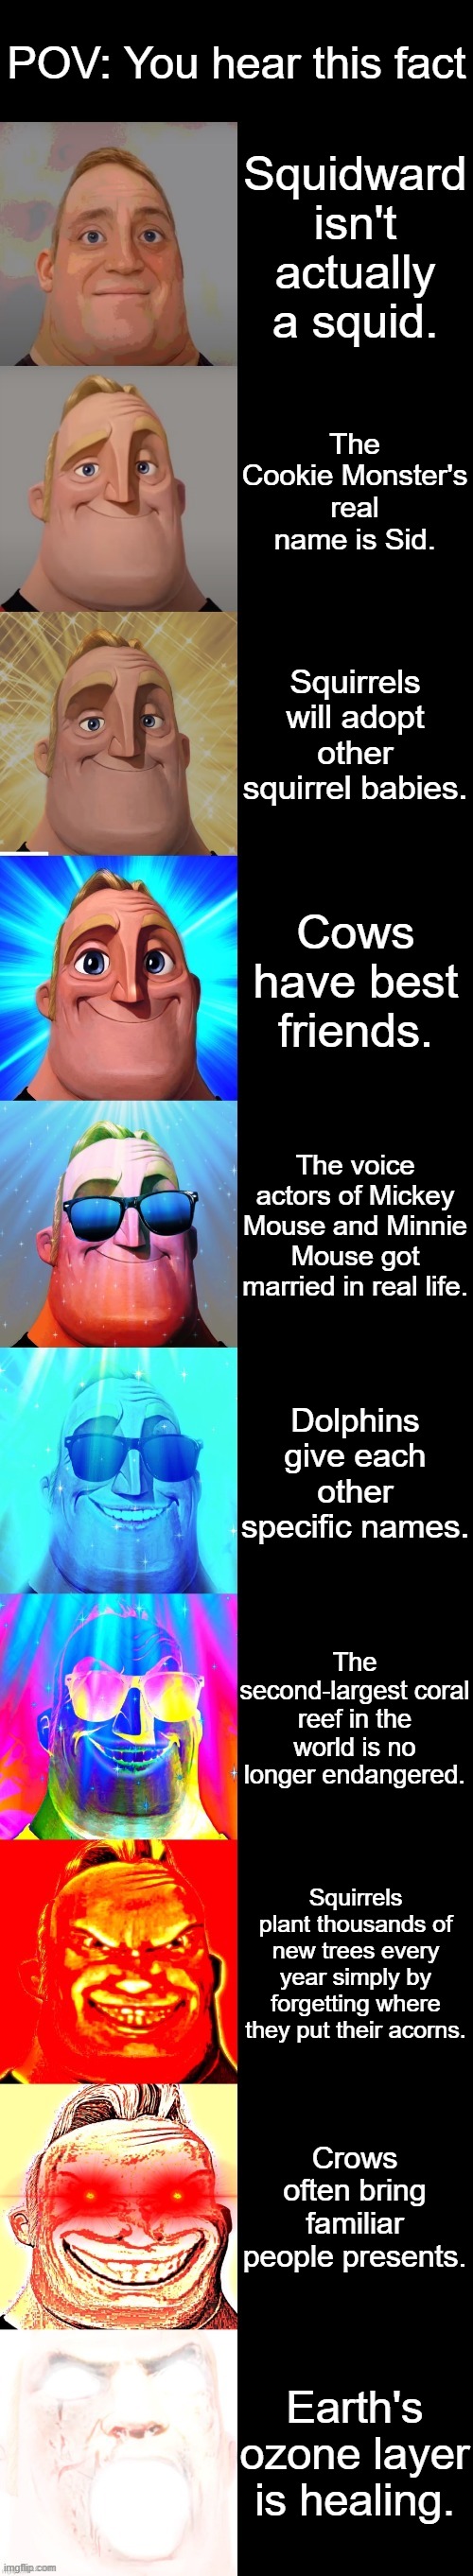 mr incredible becoming canny | POV: You hear this fact; Squidward isn't actually a squid. The Cookie Monster's real name is Sid. Squirrels will adopt other squirrel babies. Cows have best friends. The voice actors of Mickey Mouse and Minnie Mouse got married in real life. Dolphins give each other specific names. The second-largest coral reef in the world is no longer endangered. Squirrels plant thousands of new trees every year simply by forgetting where they put their acorns. Crows often bring familiar people presents. Earth's ozone layer is healing. | image tagged in mr incredible becoming canny | made w/ Imgflip meme maker